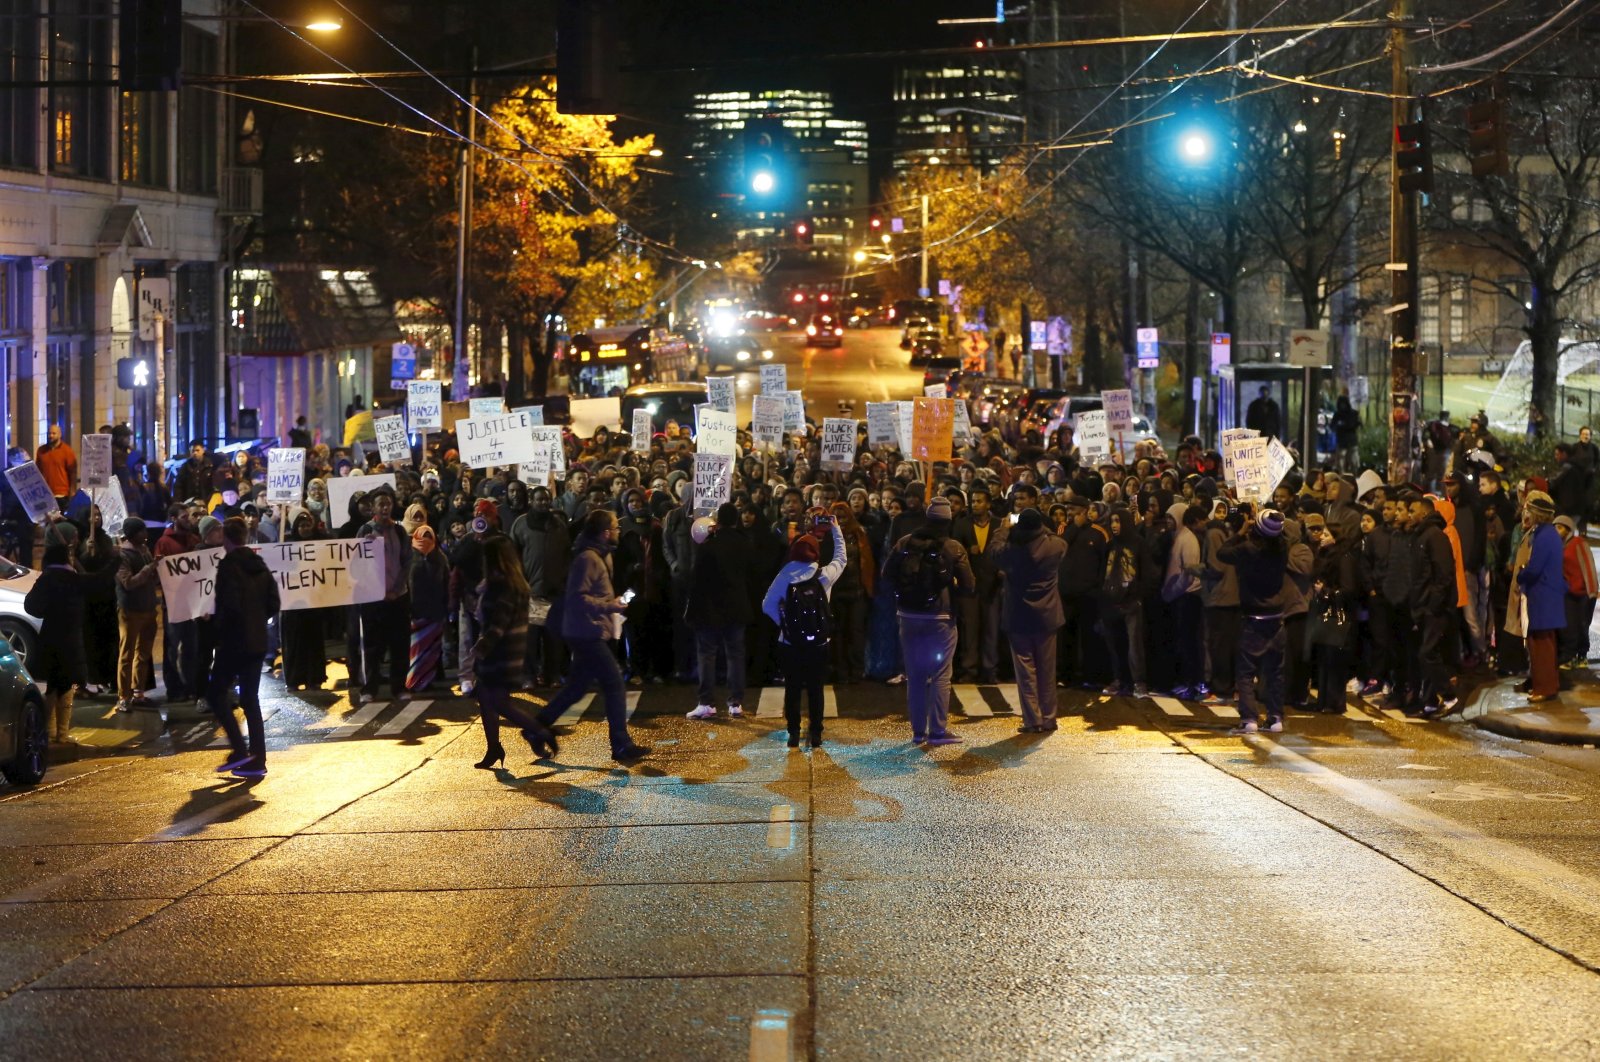 Demonstrators march during an anti-Islamophobia rally in Seattle, Washington, Dec. 10, 2015. (Reuters File Photo)